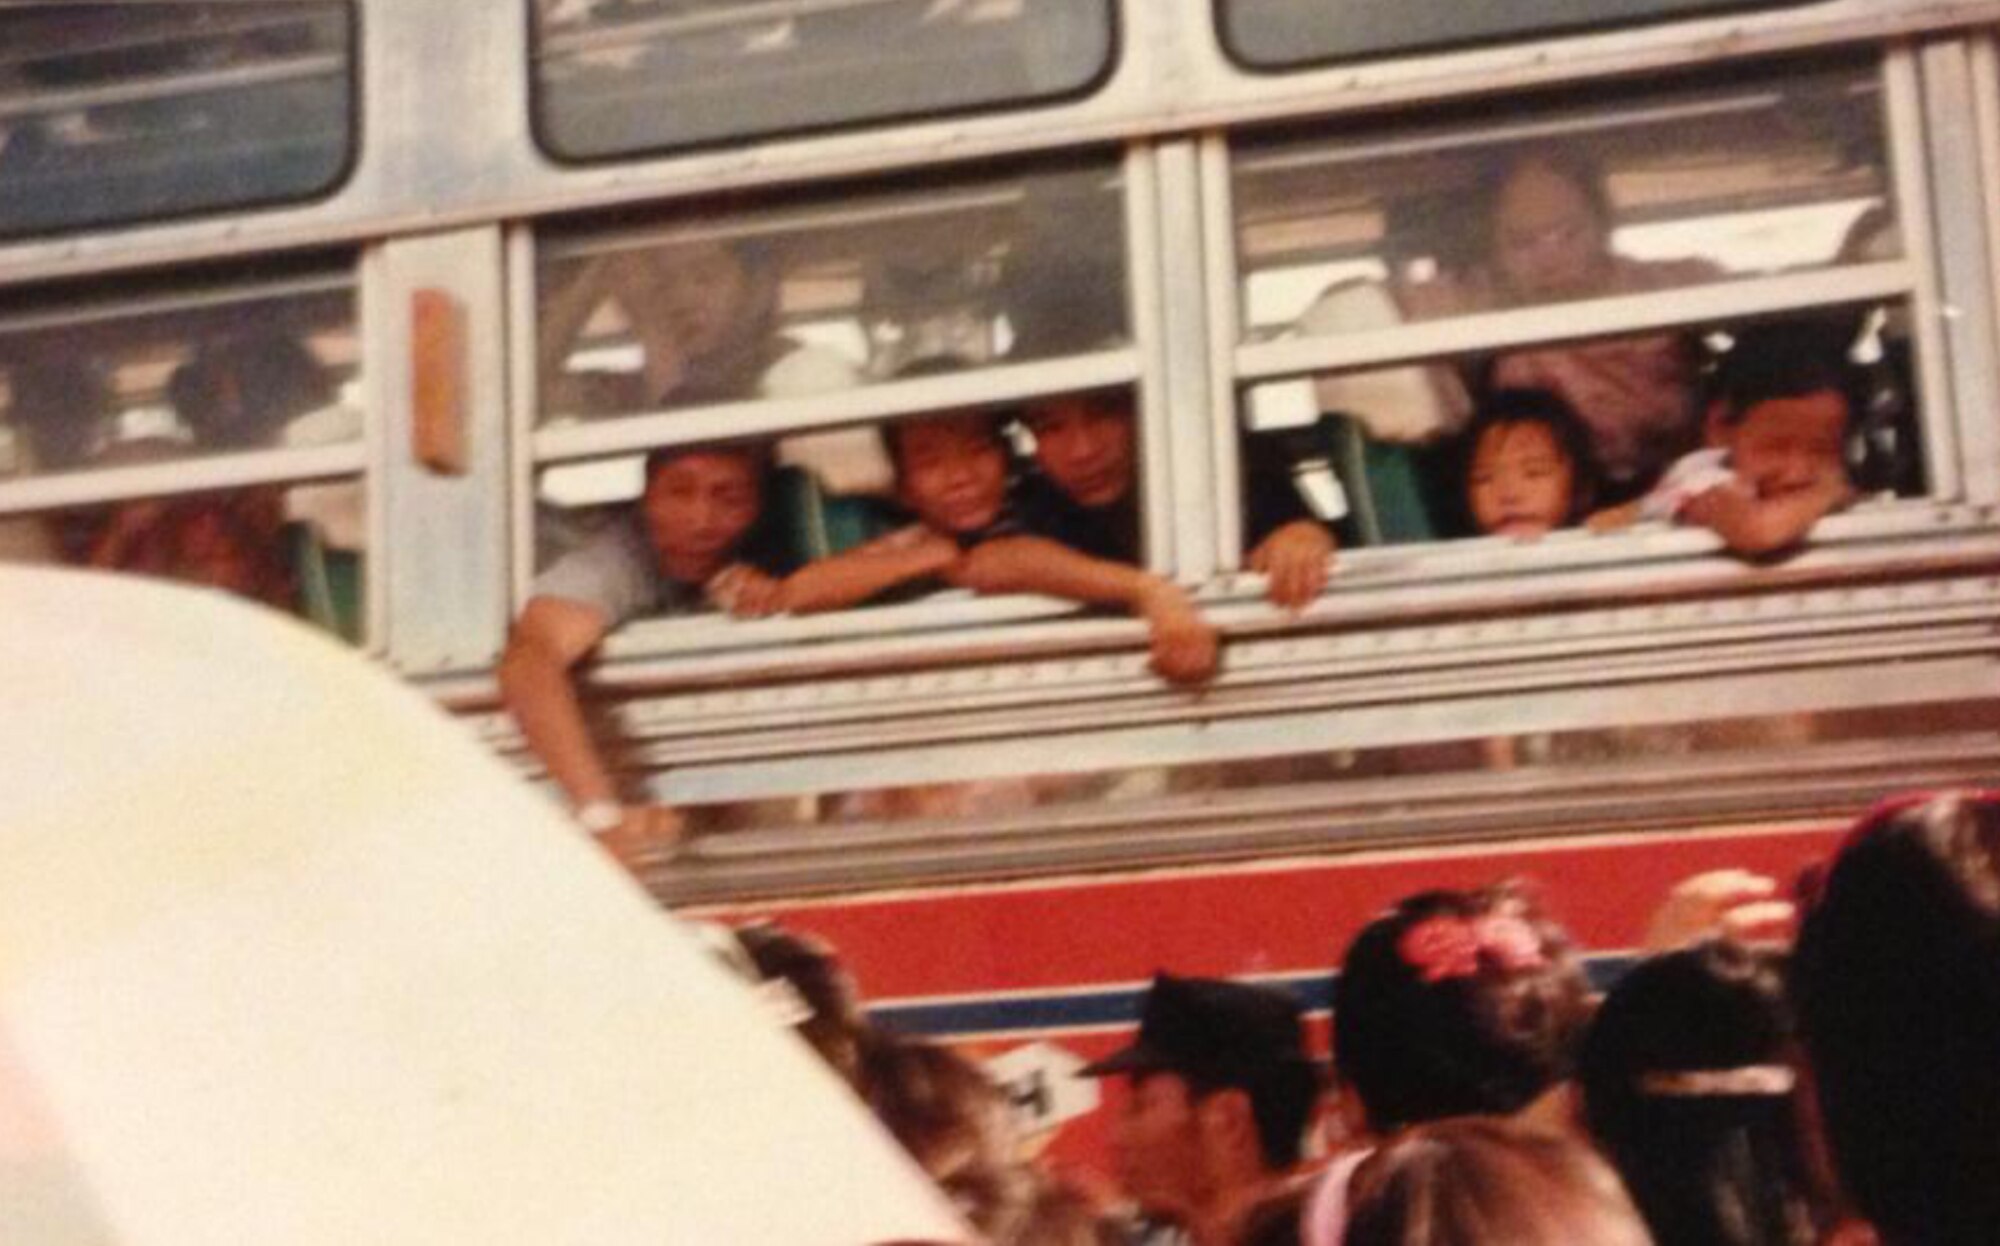 Senior Airman Yia Thao and his family wave goodbye to friends and other family members as they embark on their journey to the U.S. Sept. 1991. Many family members did not leave the refugee camp until it closed down in 2002. (Courtesy photo)